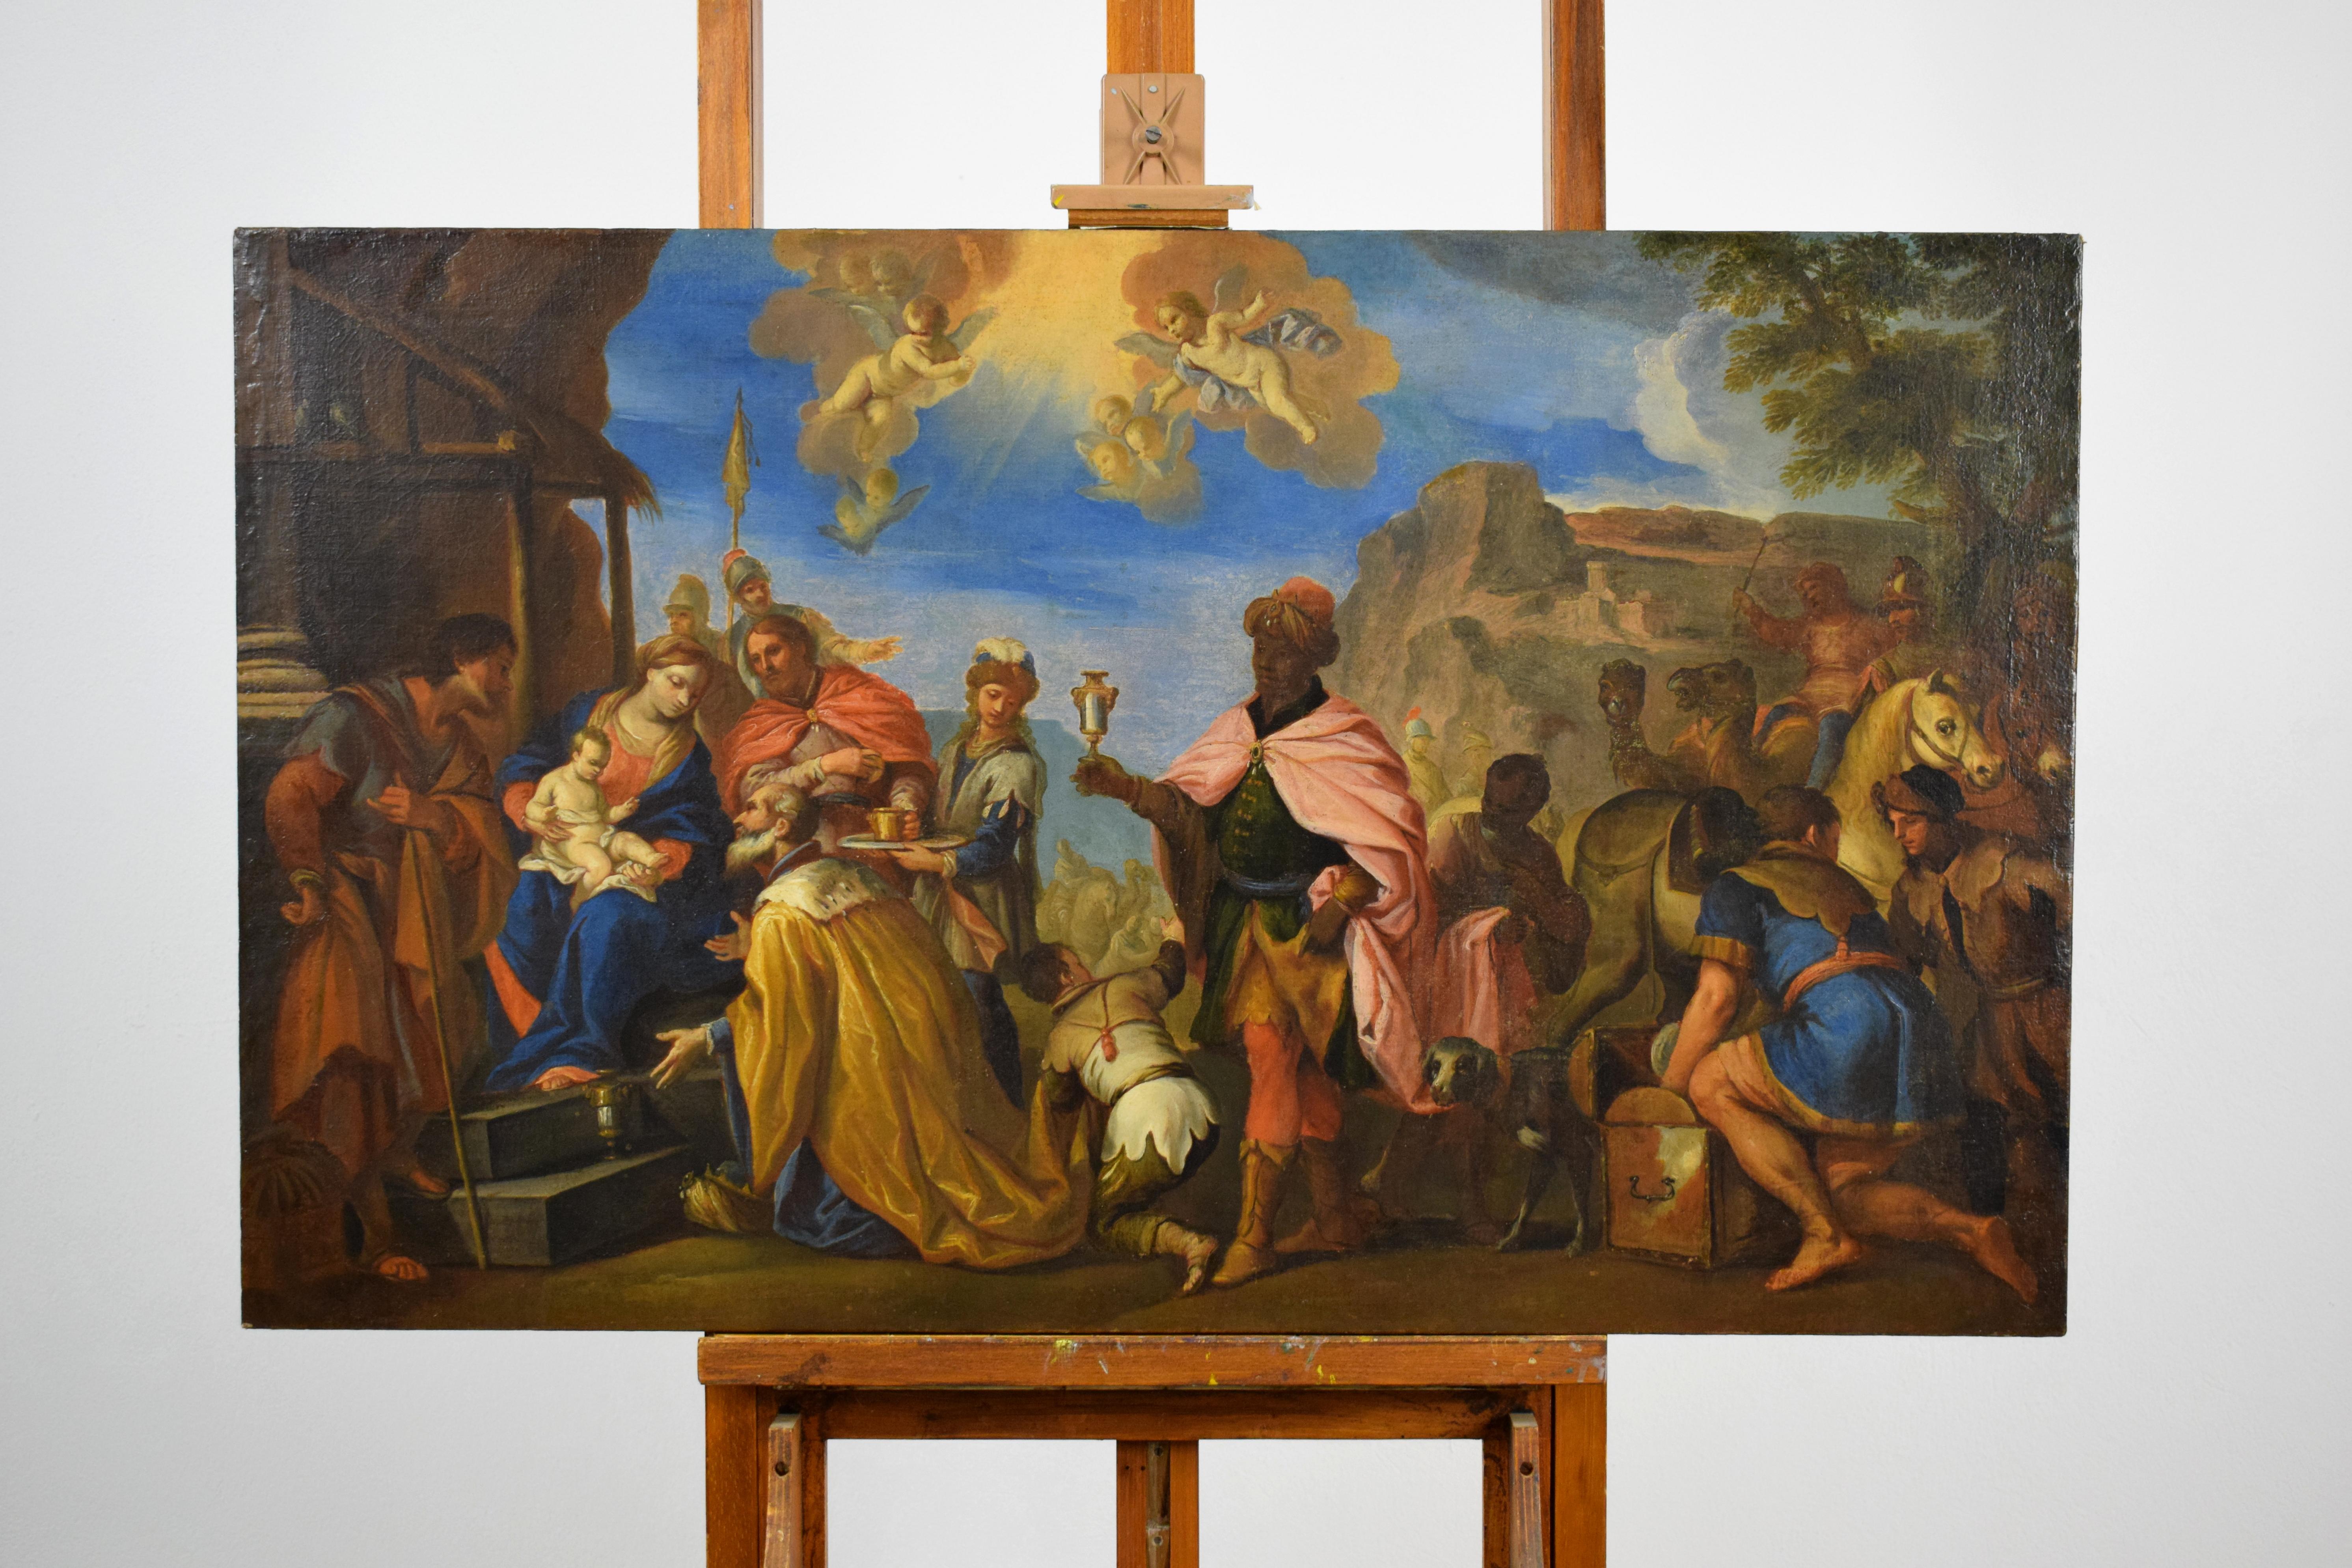 17th century painting by Venetian School, Adoration of the Magi

Italy, Venice

The oil on canvas painting represents the Adoration of the Magi and is the work of a painter active in the Venetian area between the end of the seventeenth and the